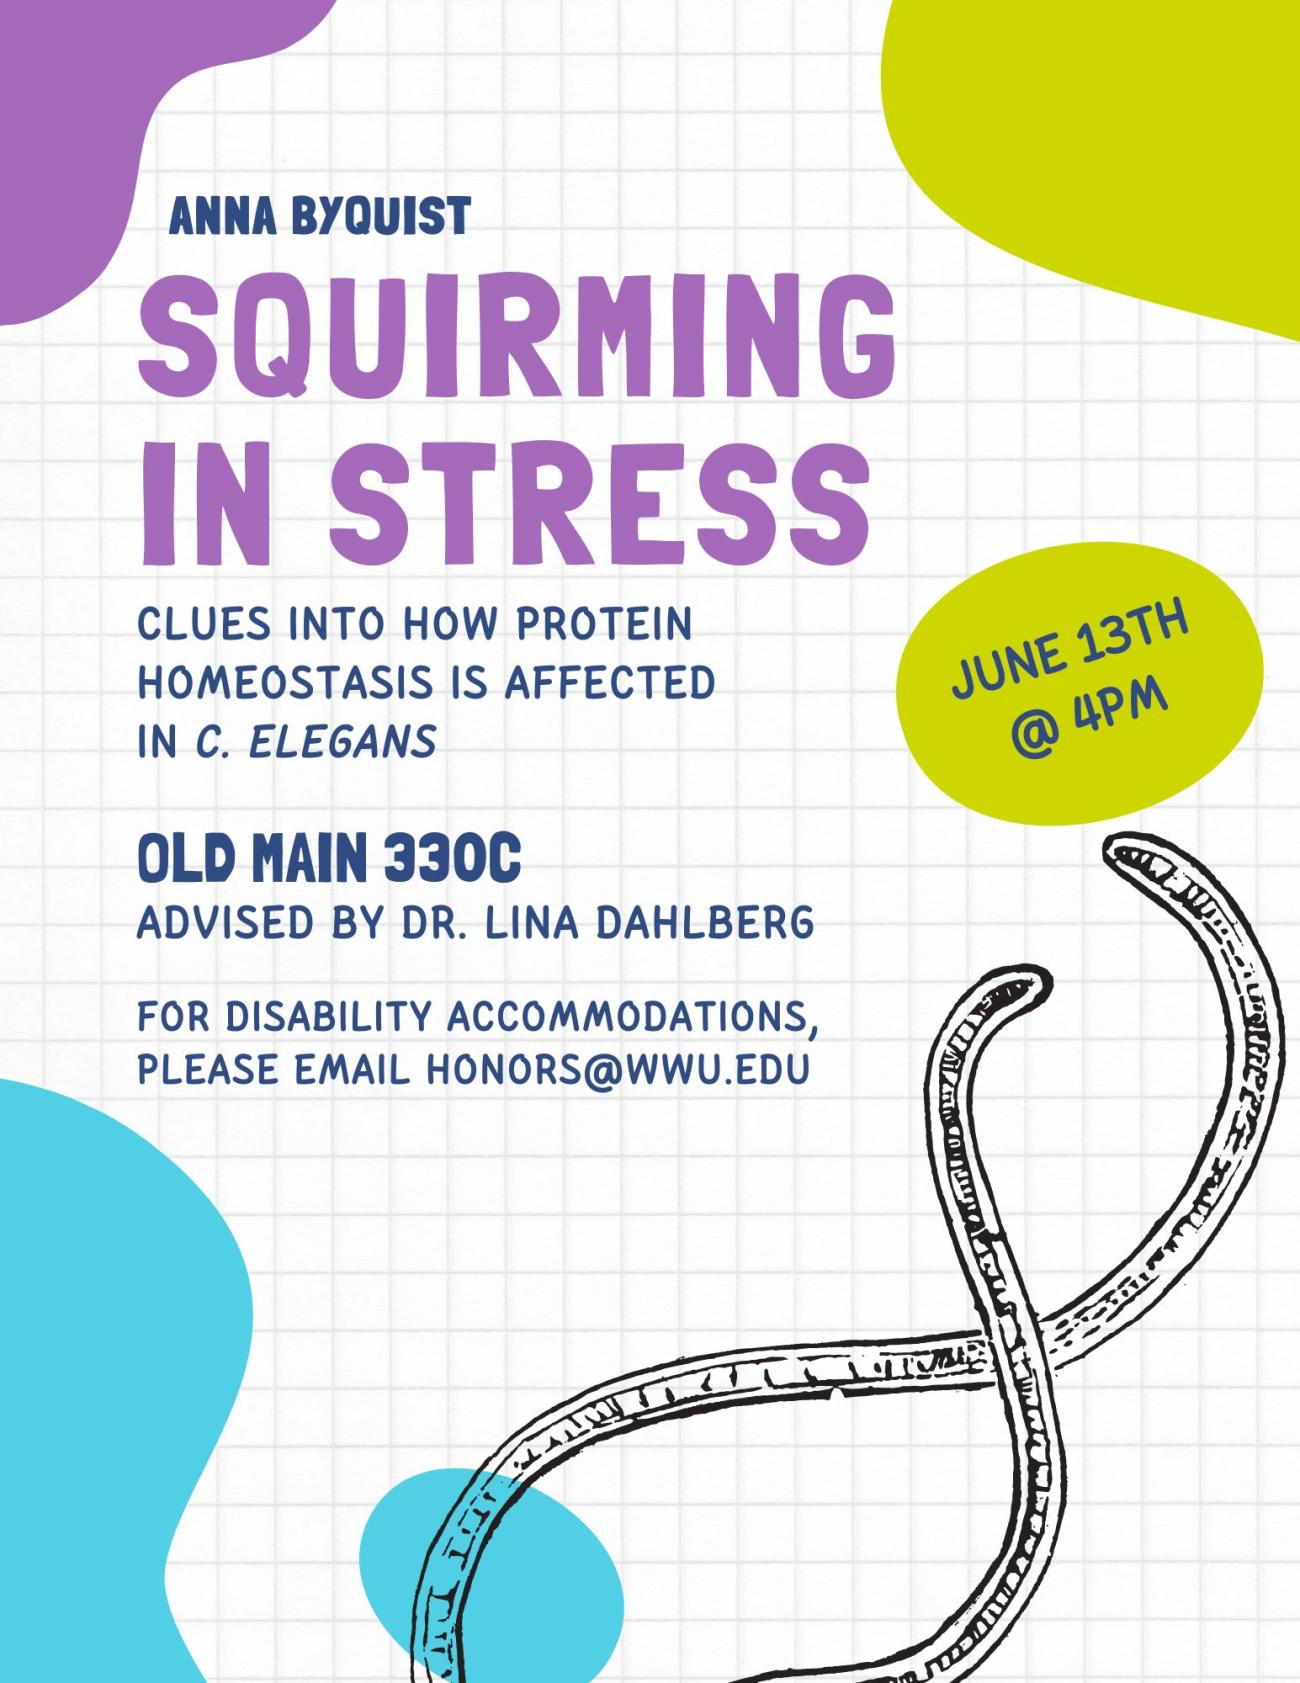 White background with "Anna Byquist" in blue font. Then the title "Squirming in stress" in purple font and subtitle "clues into how protein homeostasis is affected in C. elegans" in blue. Underneath in blue font "Old main 330C" and "advised by Dr. Lina Dahlberg" then "for disability accommodations please email honors@wwu.edu". Image of two nematodes in black and white in the bottom right corner. Green circle with "June 13th @4pm" on right side.